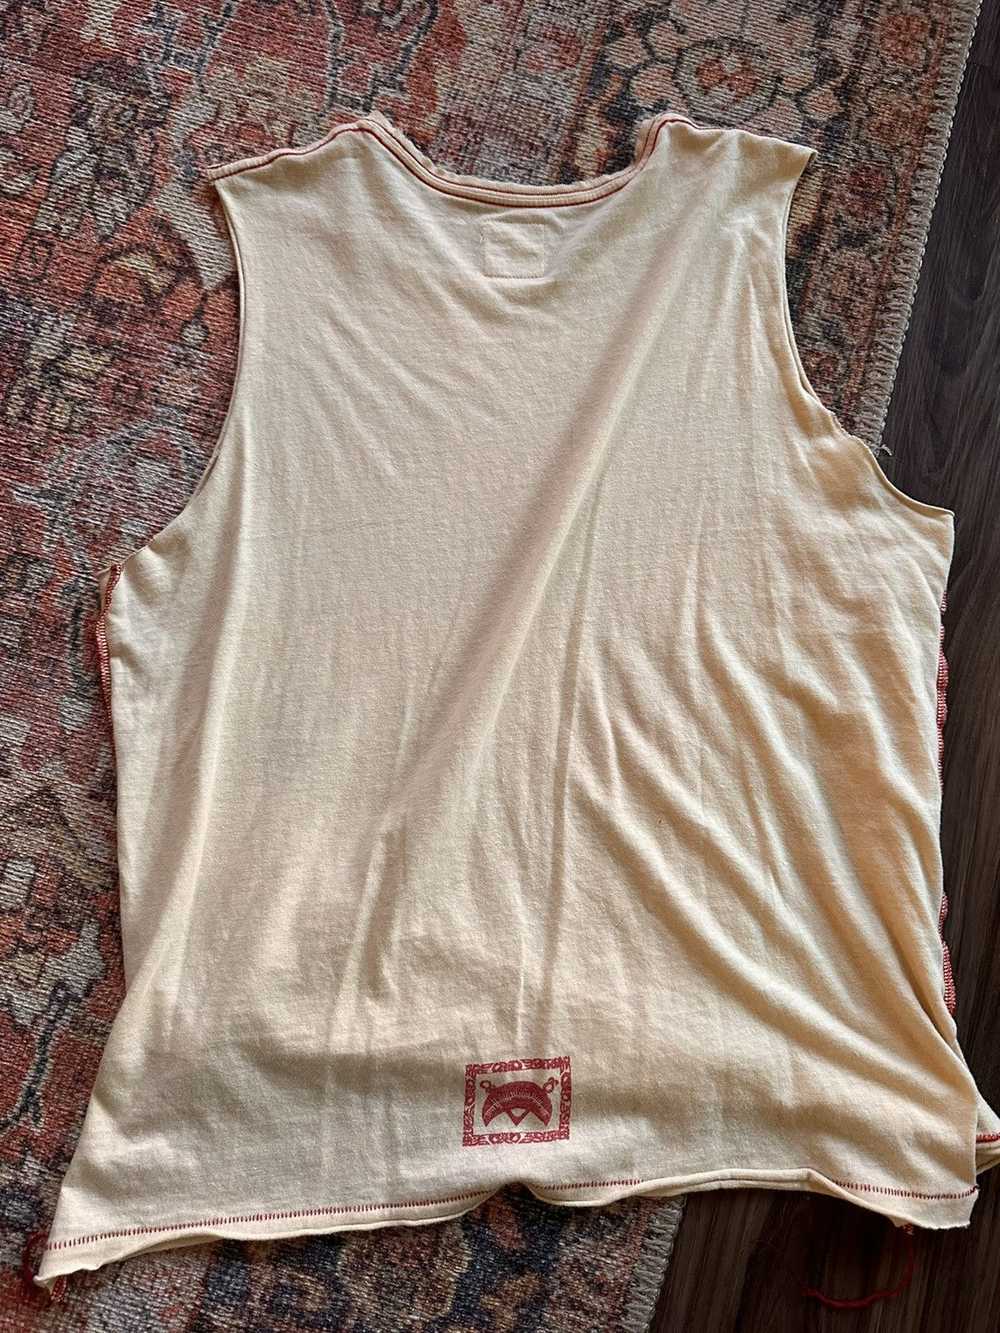 Undercover Undercover 2003 scab anarchy tank top - image 3